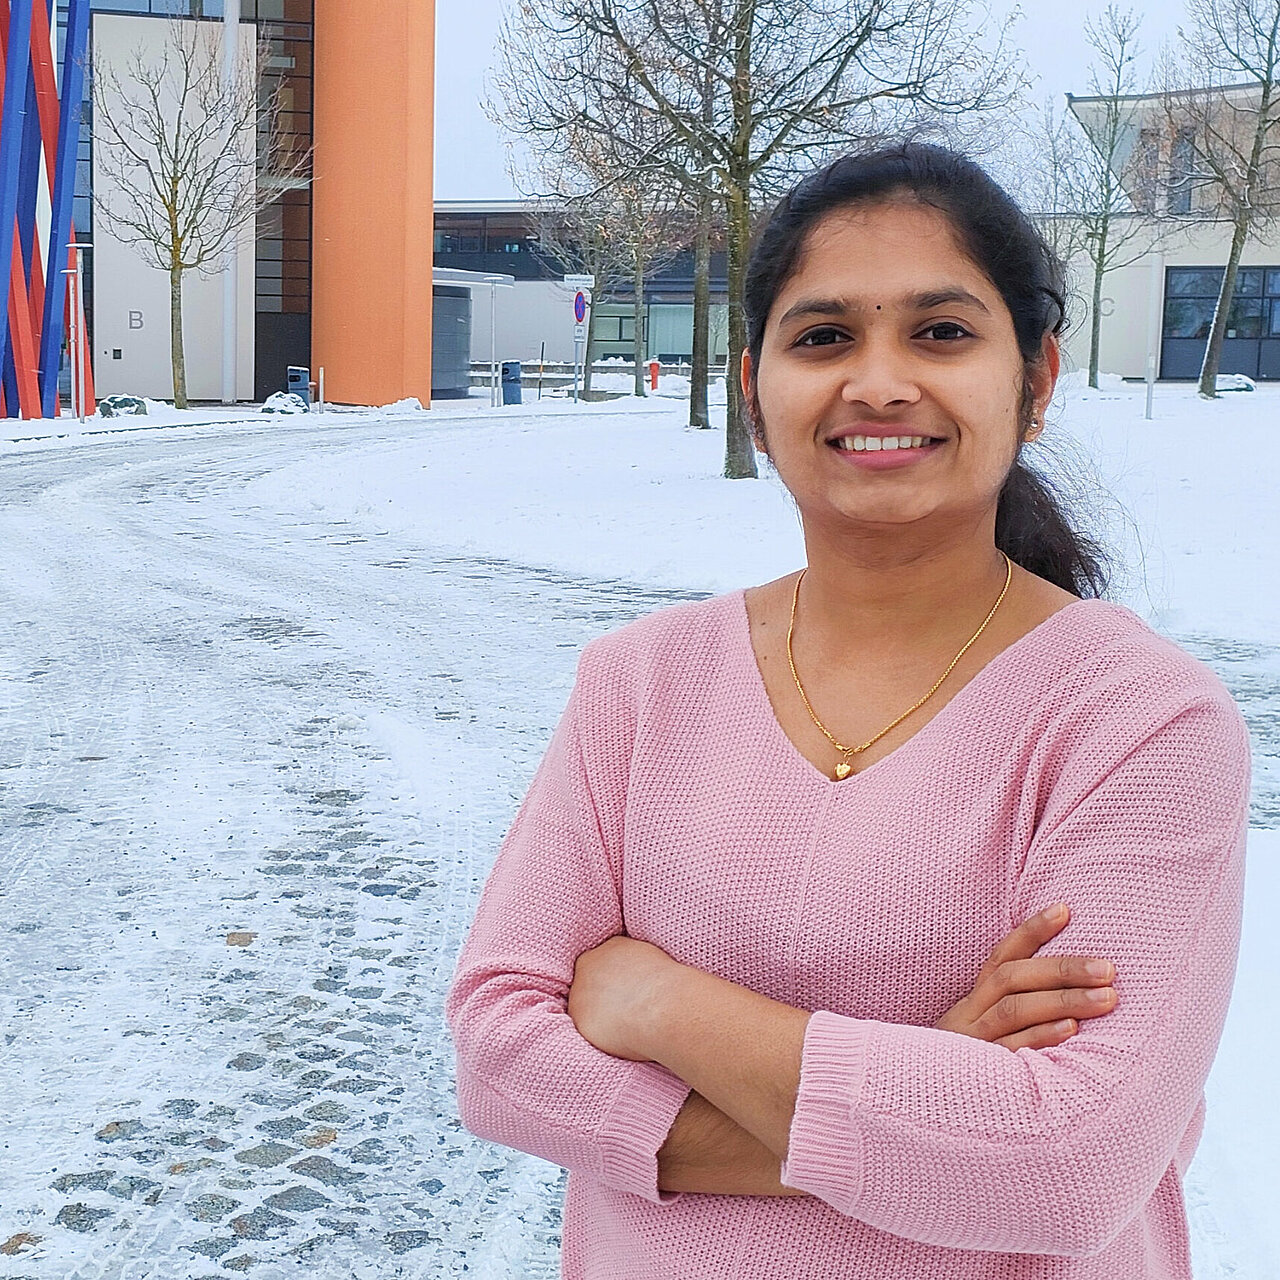 Hima from India on campus of Hof University